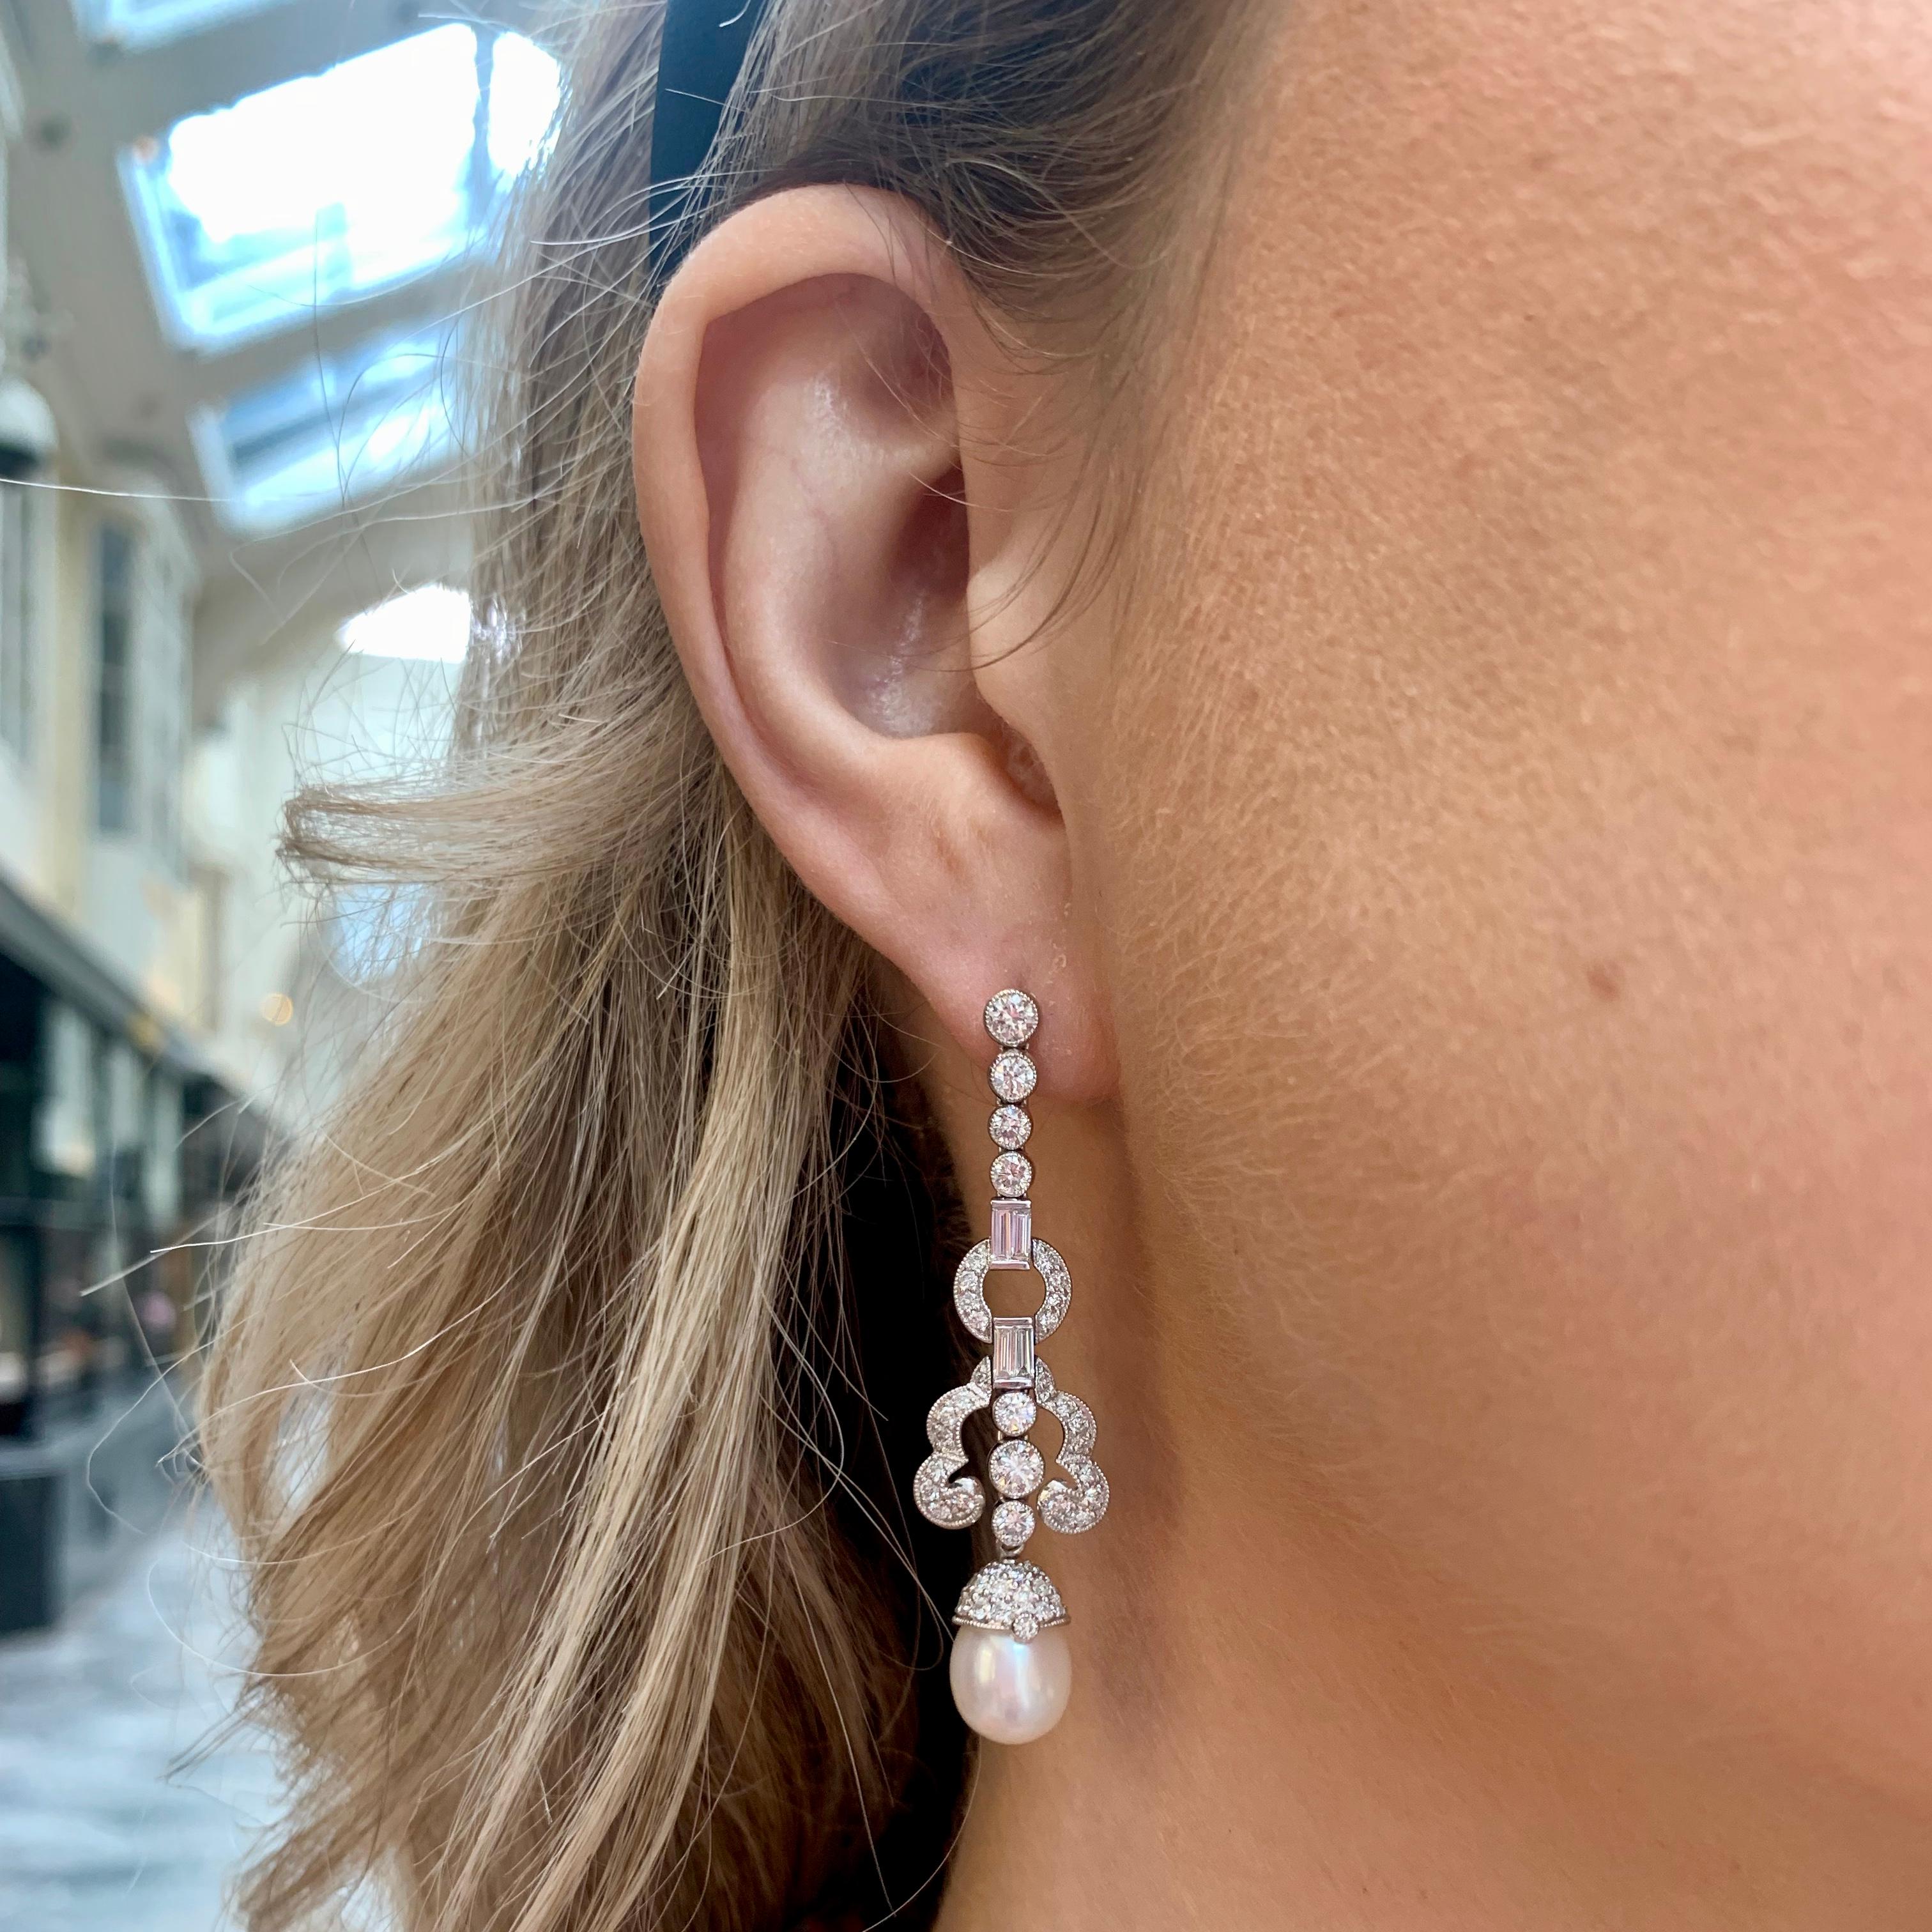 A beautiful pair of Art Deco inspired pearl and diamond earrings set in platinum.

Each earring is firstly composed of a sequence of graduating diamonds, rubover set securely. This leads to two emerald cut diamonds encased in a diamond hoop.